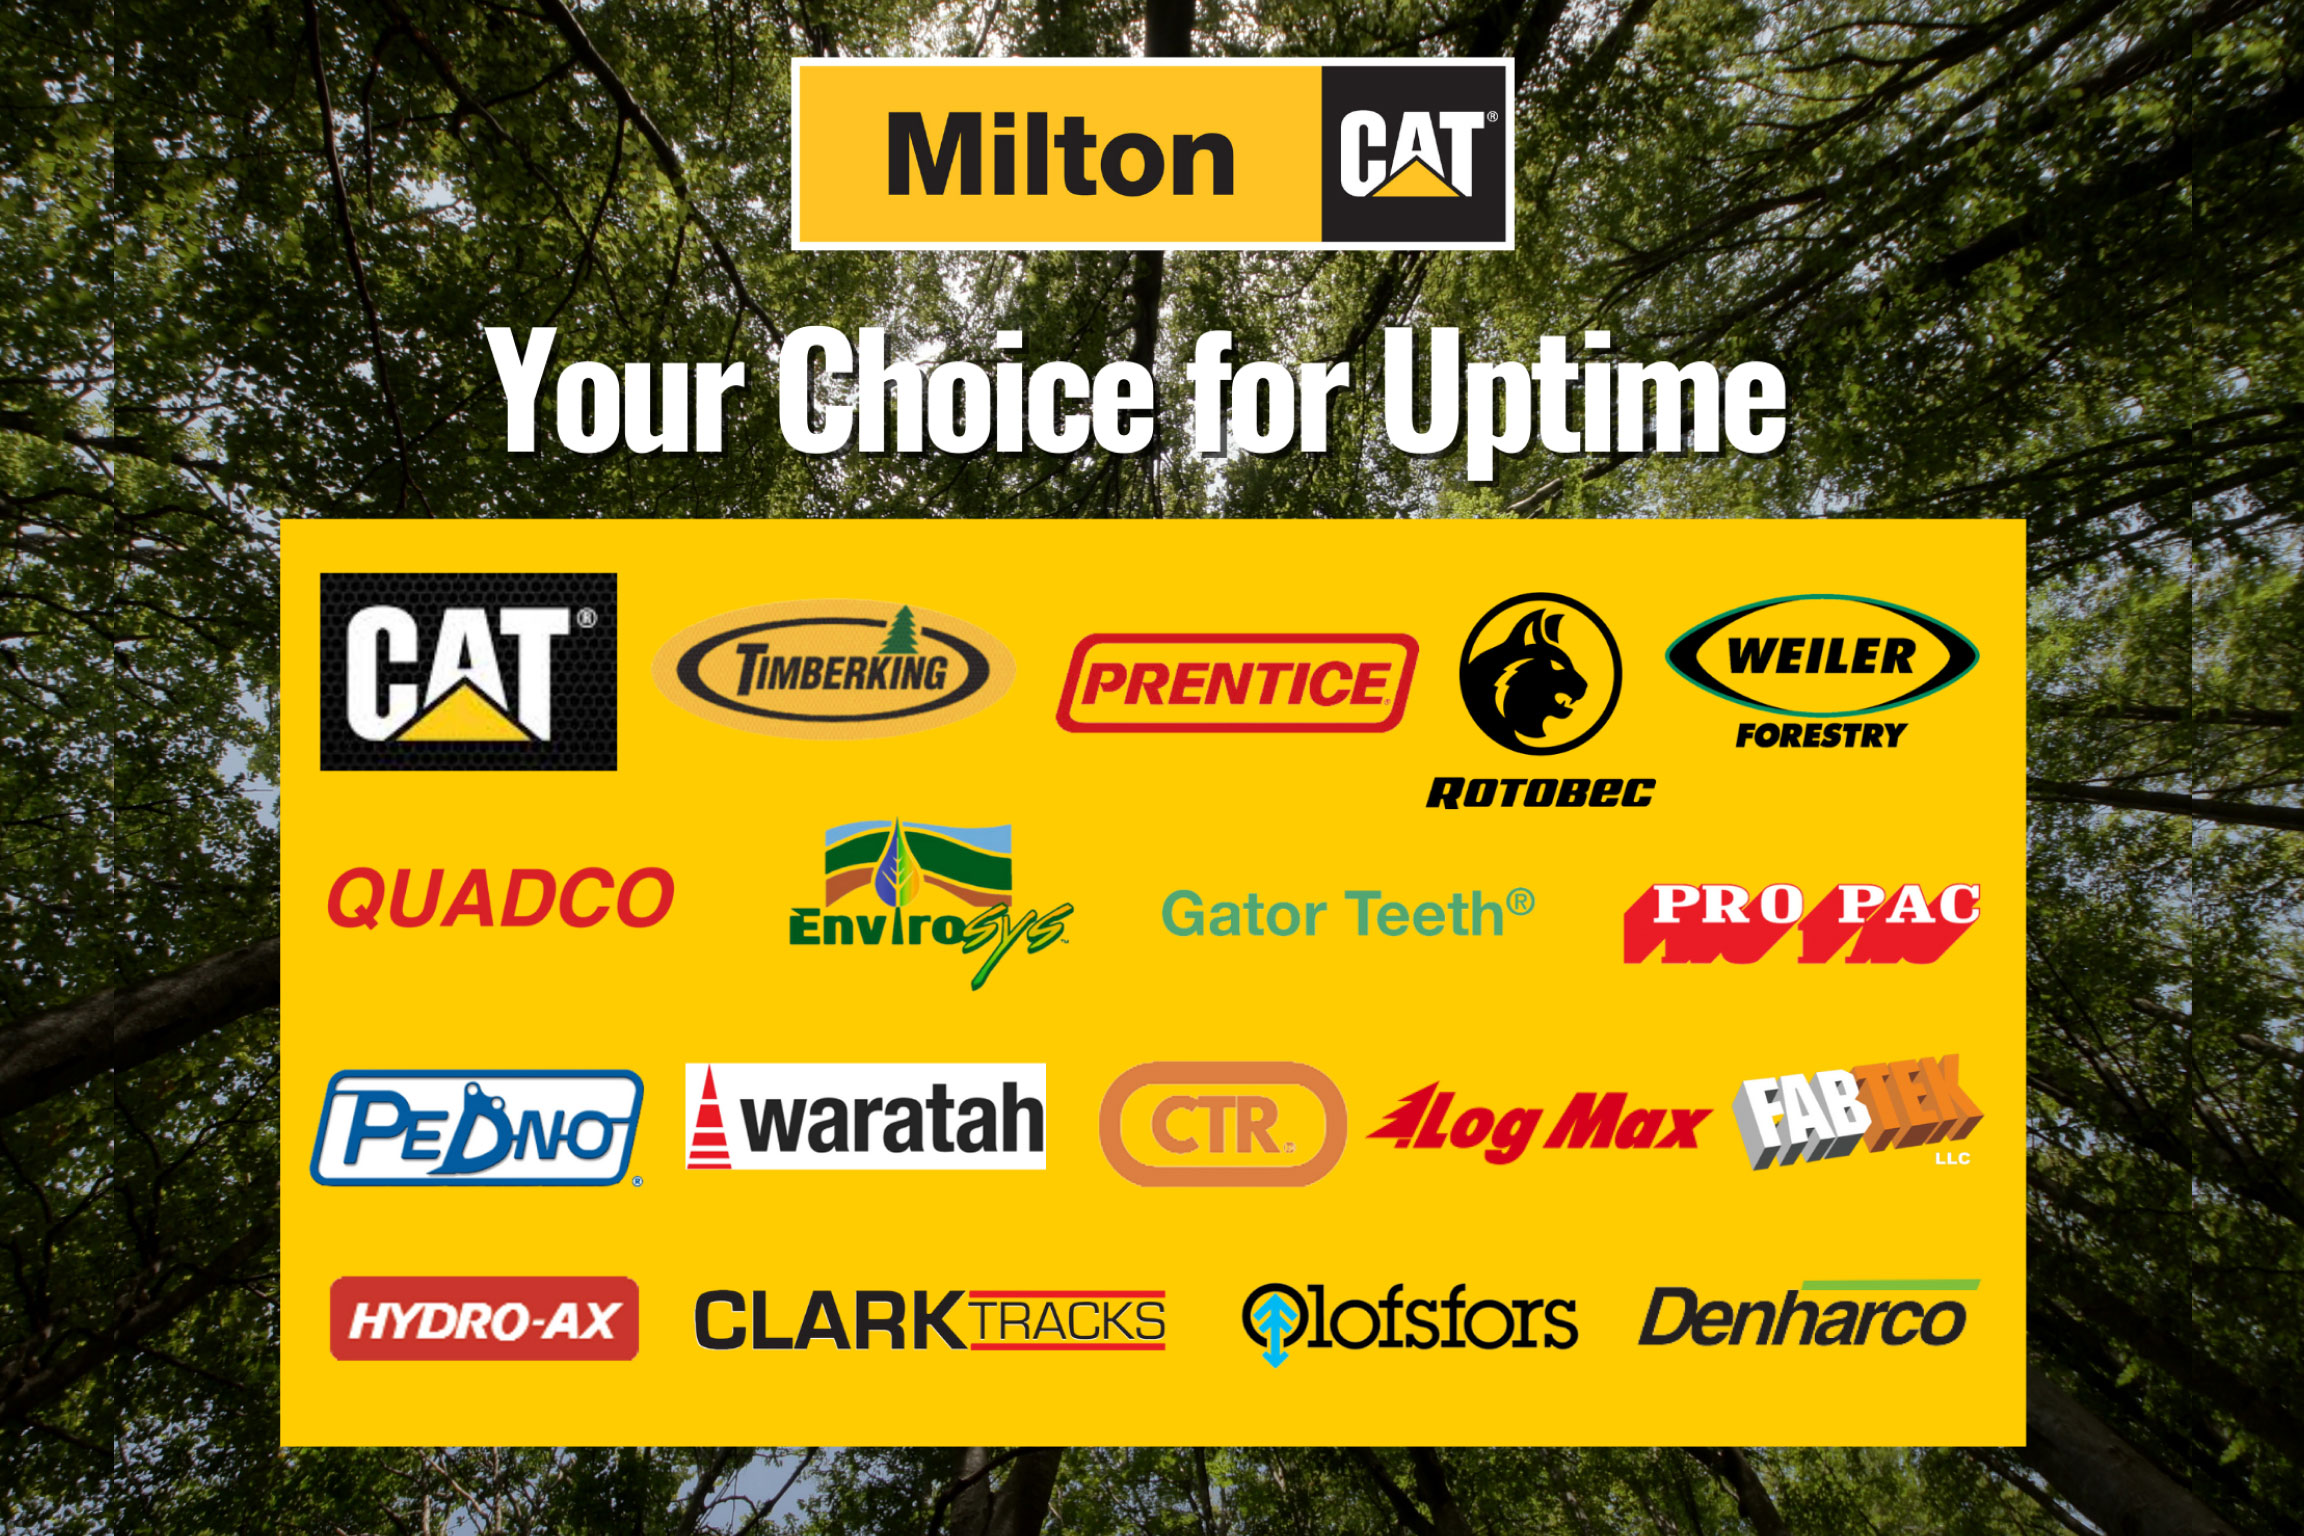 milton-cat-forestry-parts-card-brands